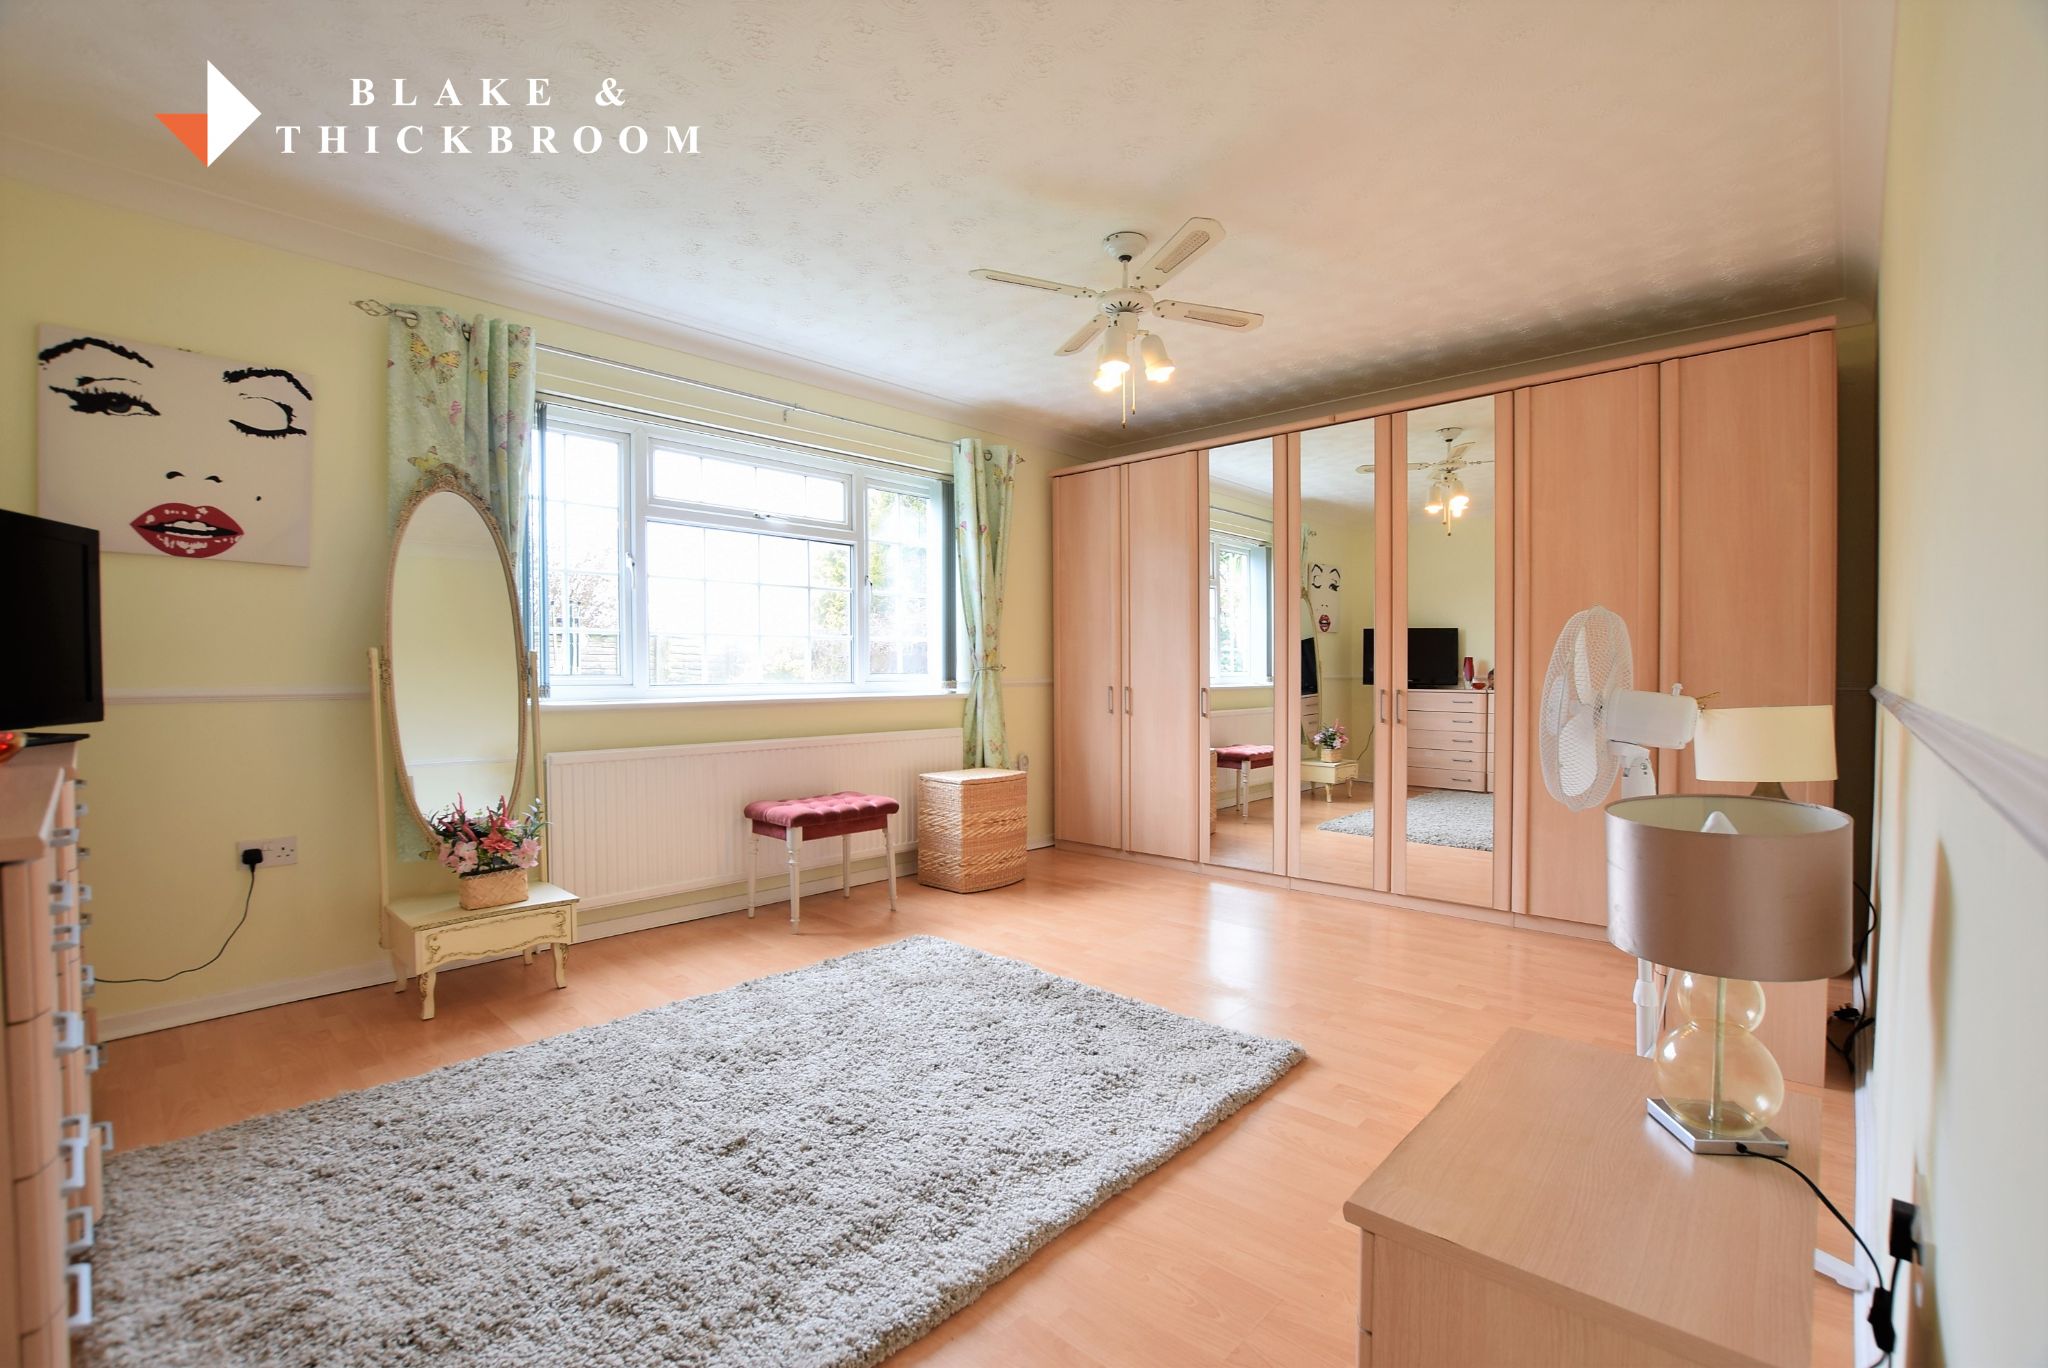 Blake & Thickbroom - Estate Agency in Clacton-on-Sea, Essex